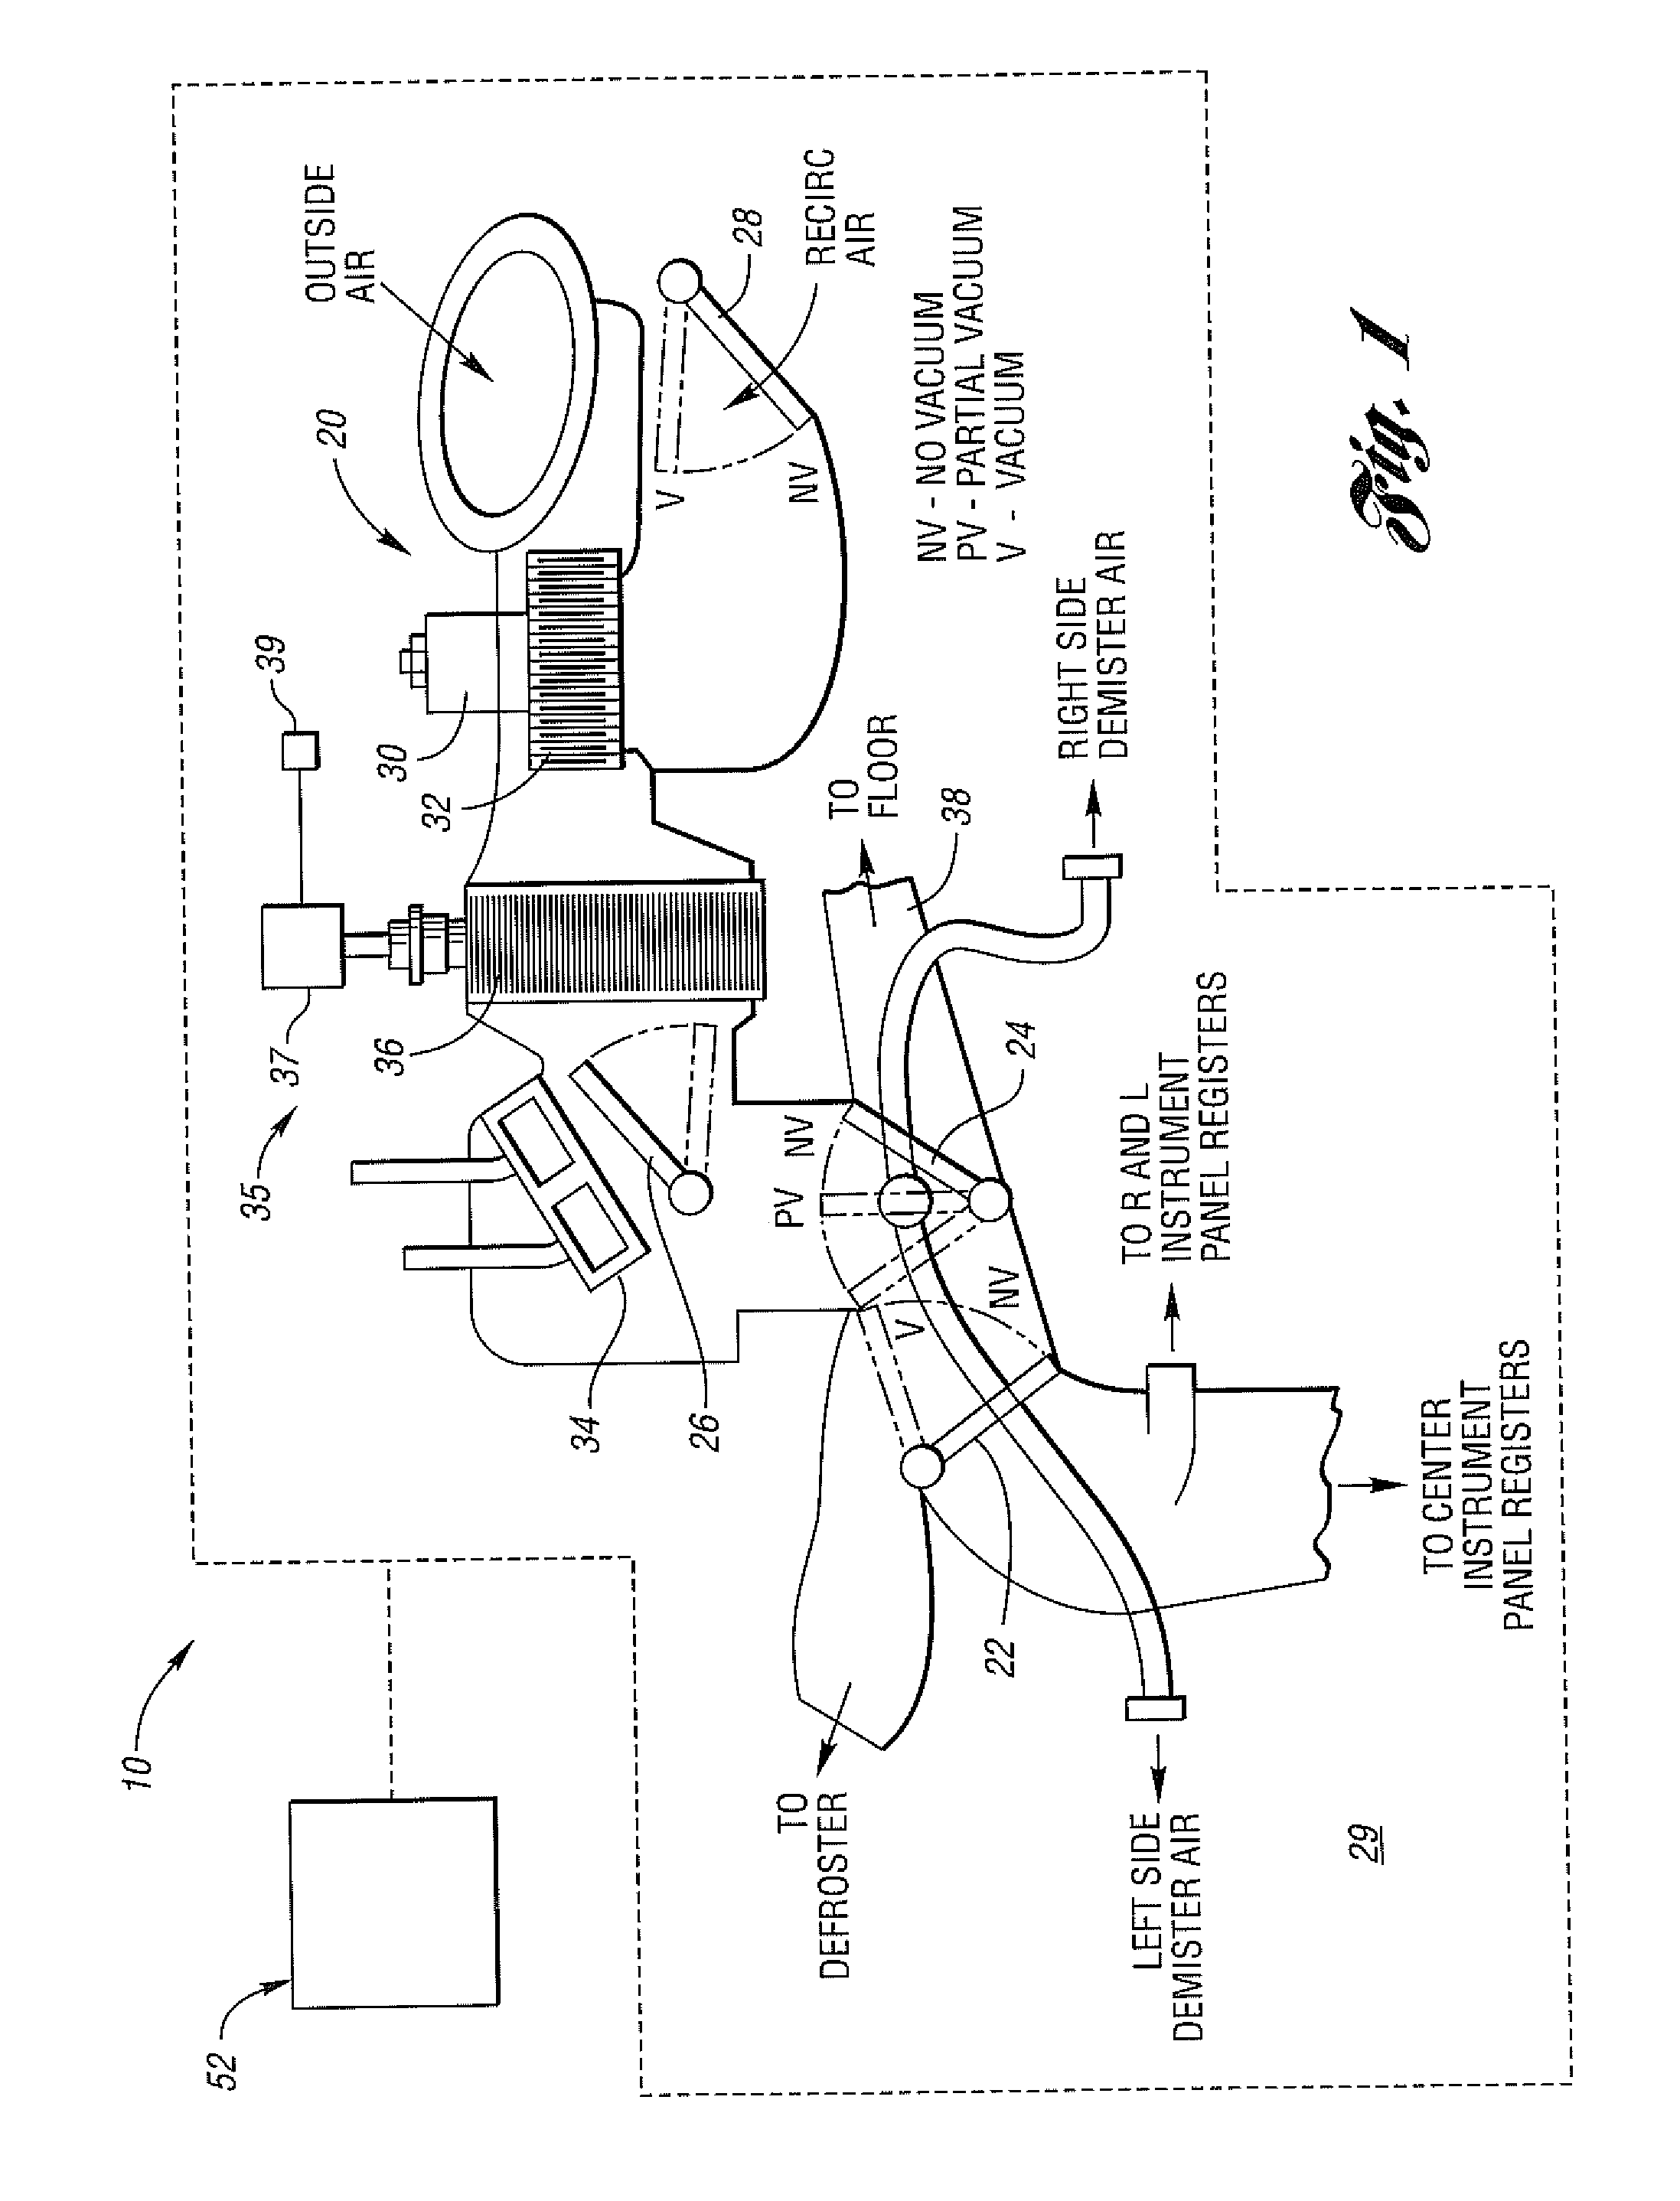 Climate Control System And Method For Optimizing Energy Consumption Of A Vehicle